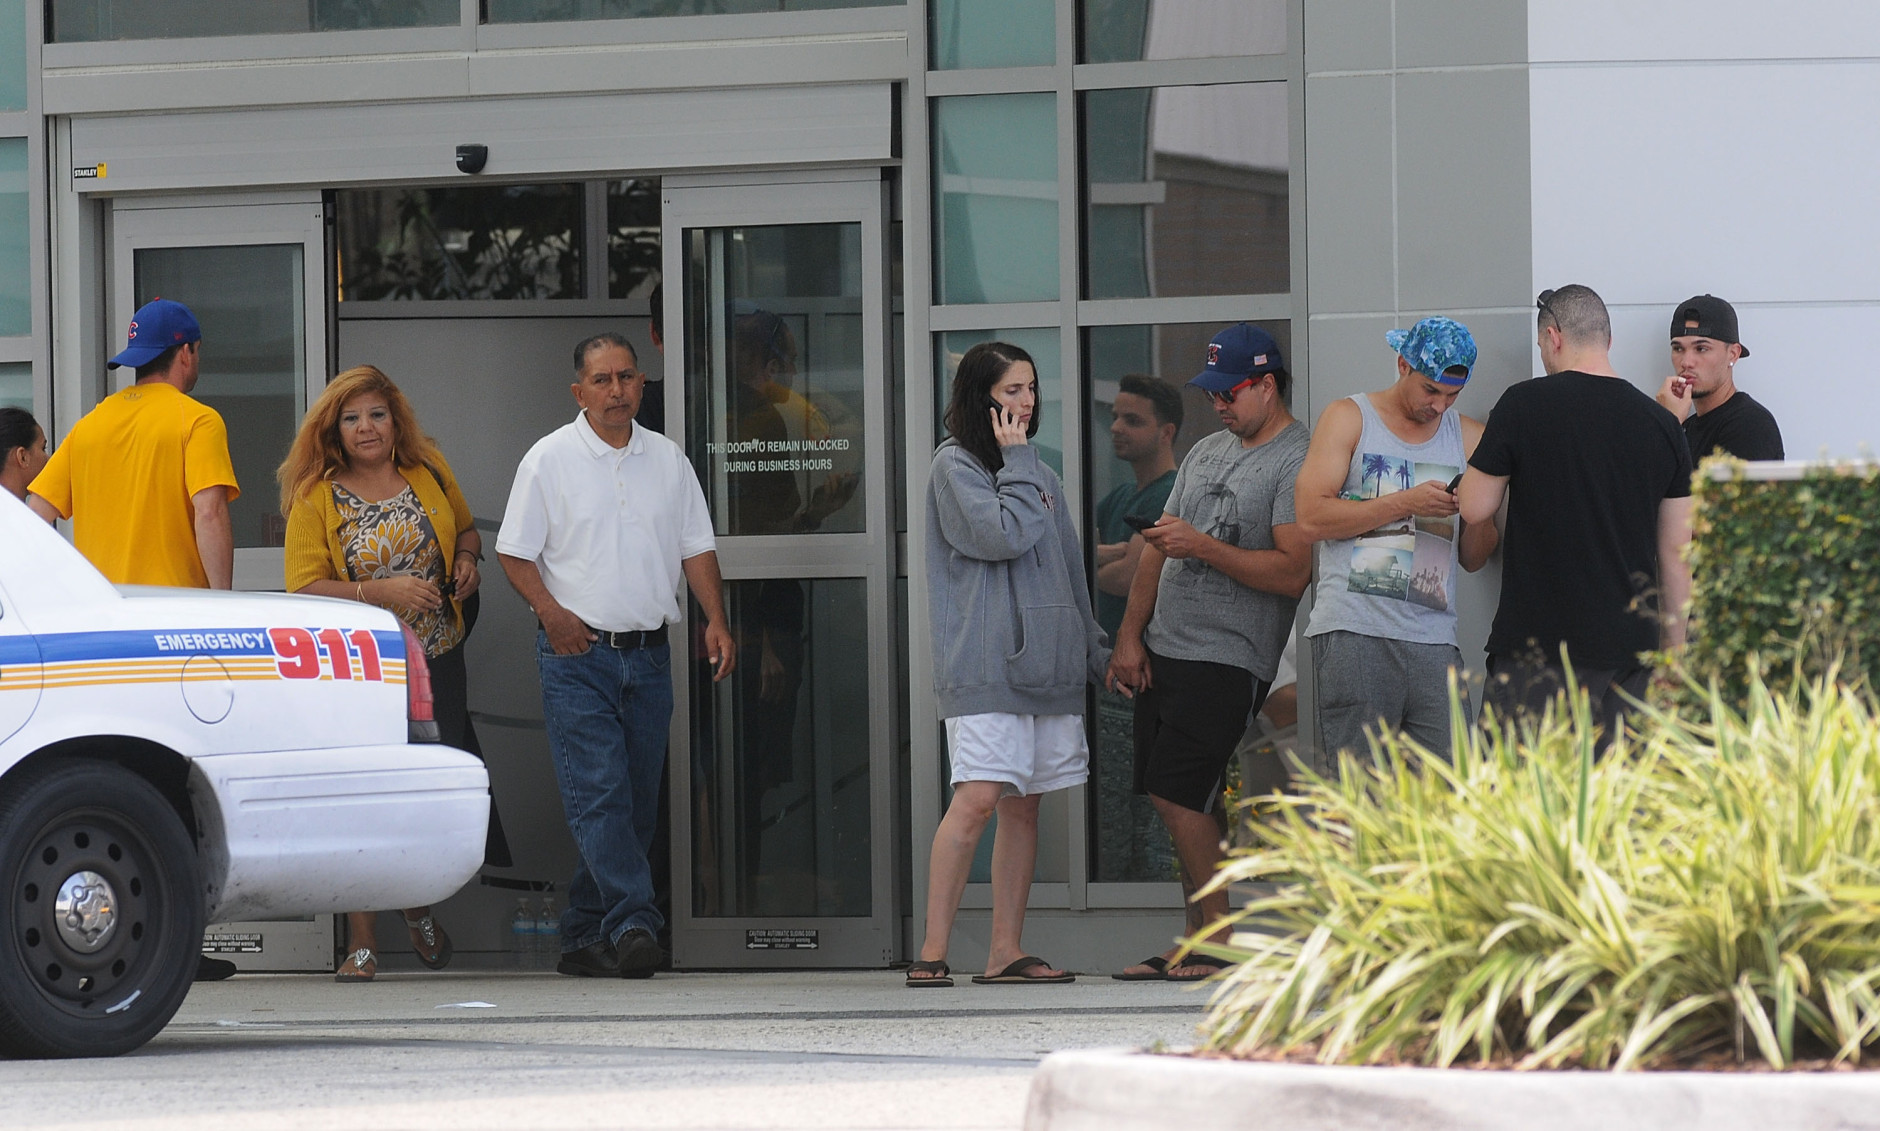 ORLANDO, FLORIDA - JUNE 12:  Families and friends await for information outside of the Orlando Regional Medical Center about loved ones who may have been victims of the mass shooting at the Pulse nightclub on June 12, 2016 in Orlando, Florida. The suspected shooter, Omar Mateen, was shot and killed by police. 50 people are reported dead and 53 were injured in what is now the worst mass shooting in U.S. history. (Photo by Gerardo Mora/Getty Images)